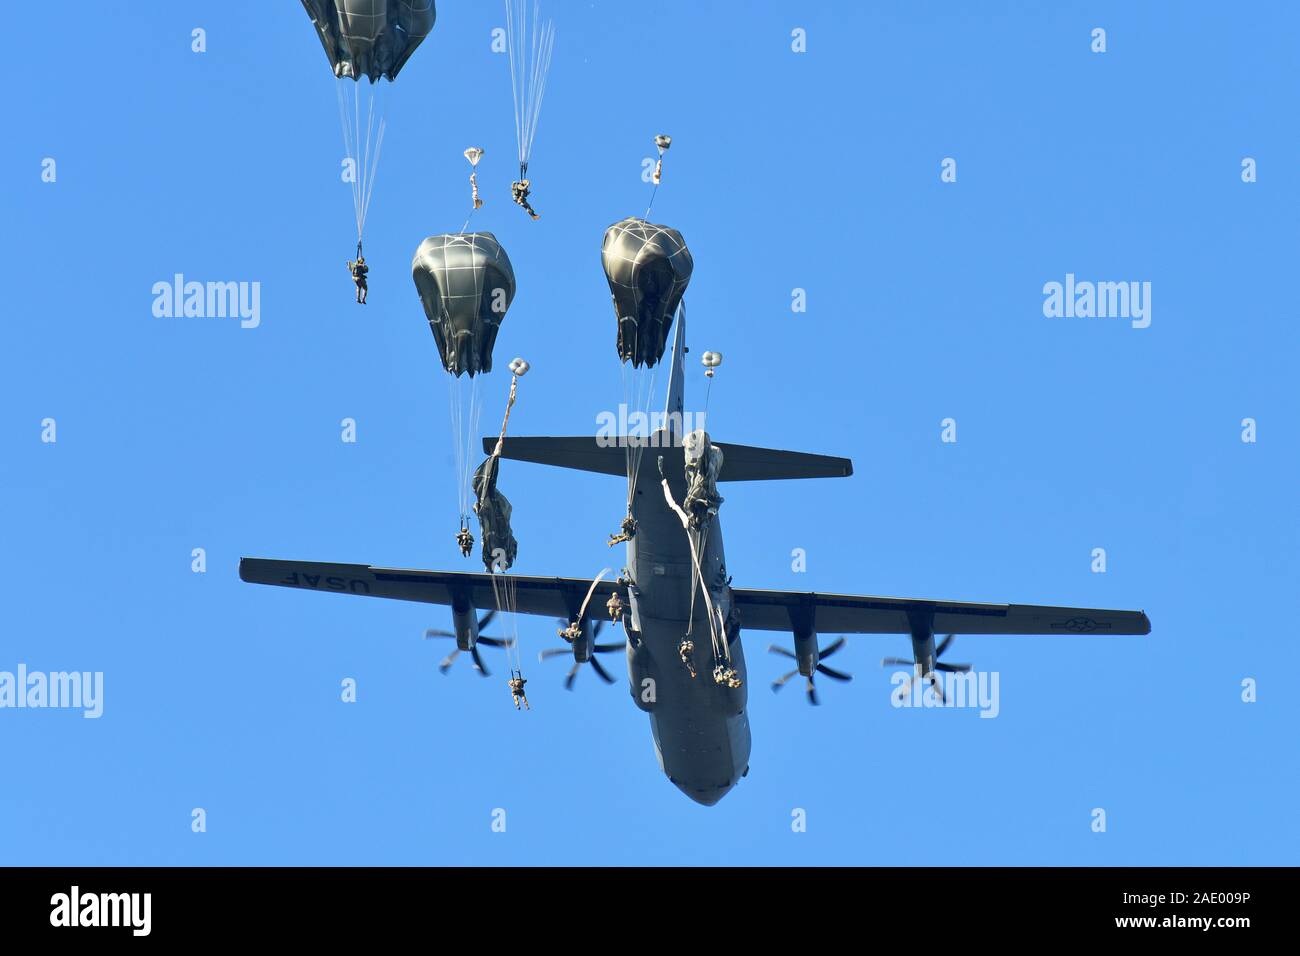 U.S. Army Paratroopers assigned to the 173rd Airborne Brigade with British and Italian Army paratroopers, exit a U.S. Air Force C-130 Hercules aircraft from the 86th Air Wing during airborne operation at Juliet Drop Zone, Pordenone, Italy Dec. 3, 2019. The 173rd Airborne Brigade is the U.S. Army Contingency Response Force in Europe, capable of projecting ready forces anywhere in the U.S. European, Africa or Central Commands' areas of responsibility. (U.S. Army Photo by Paolo Bovo) Stock Photo